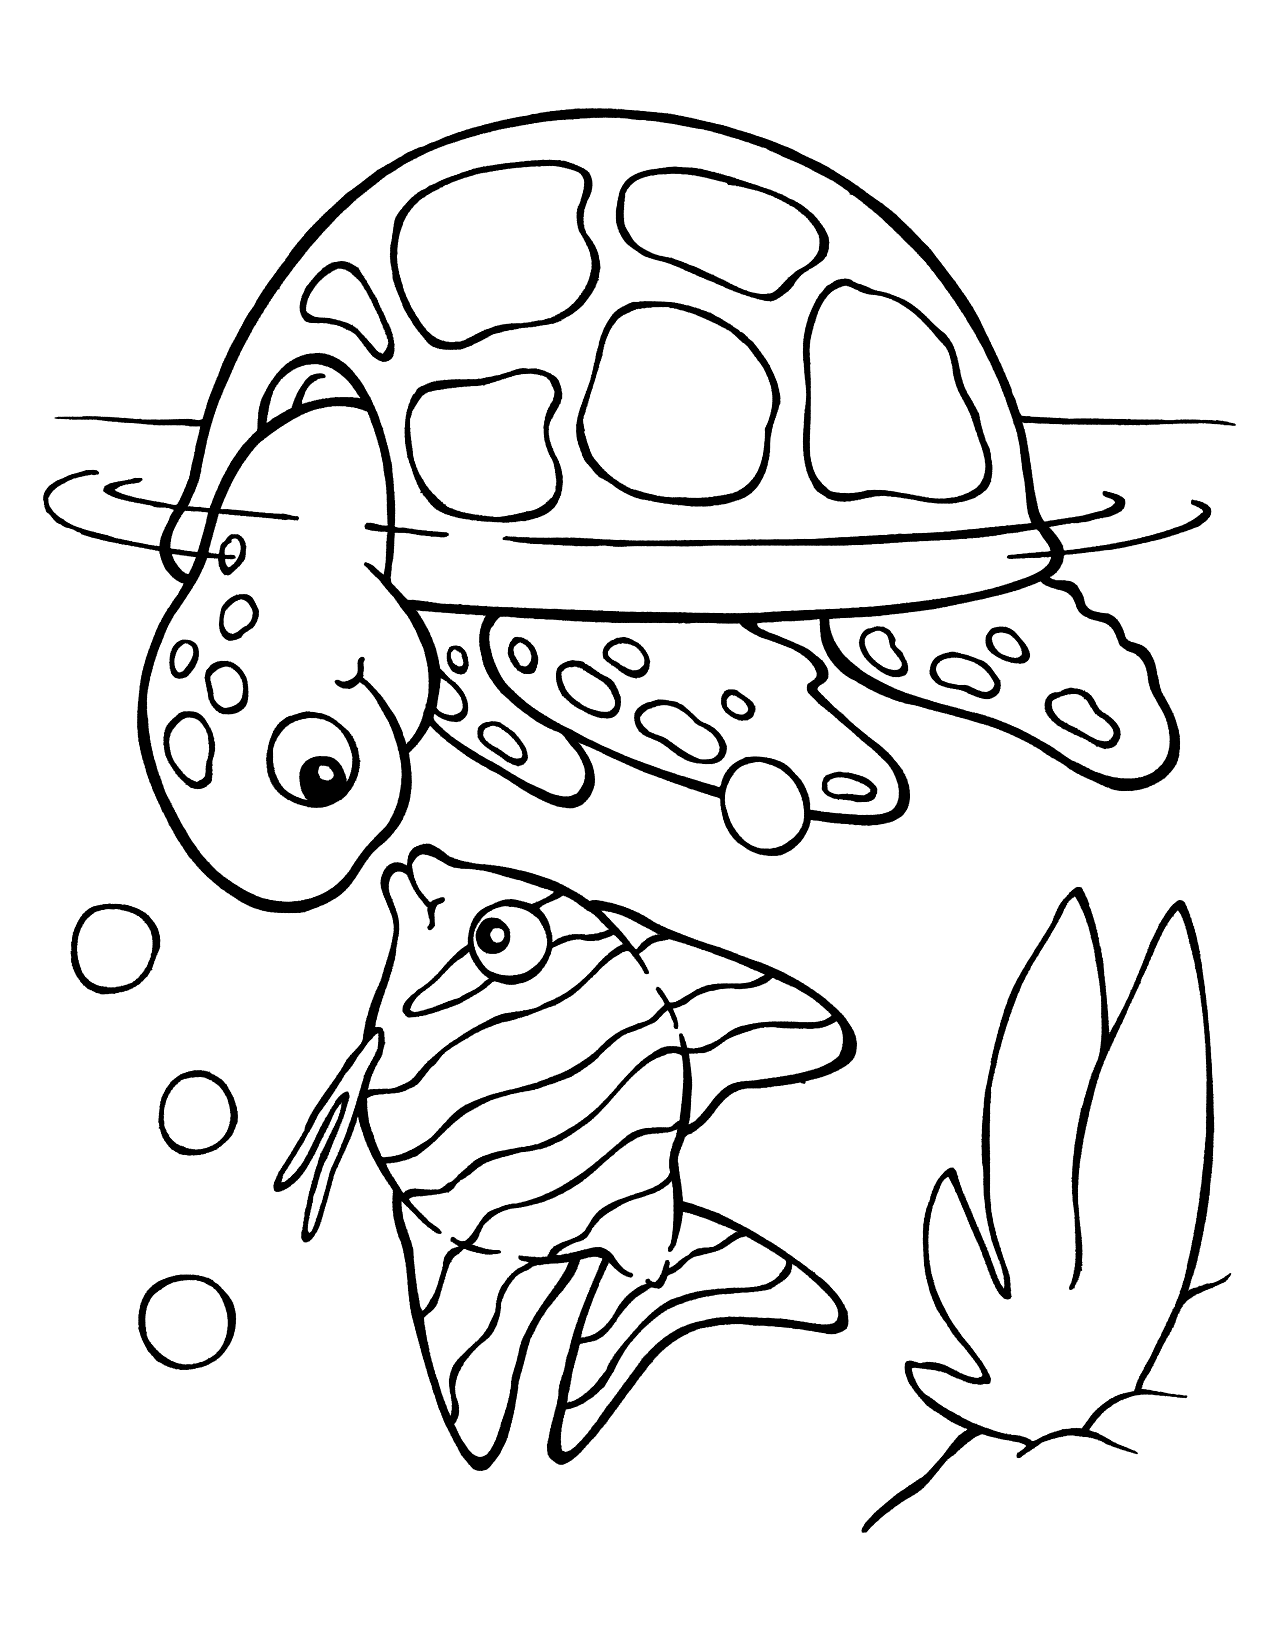 Turtle And Fish Coloring Page